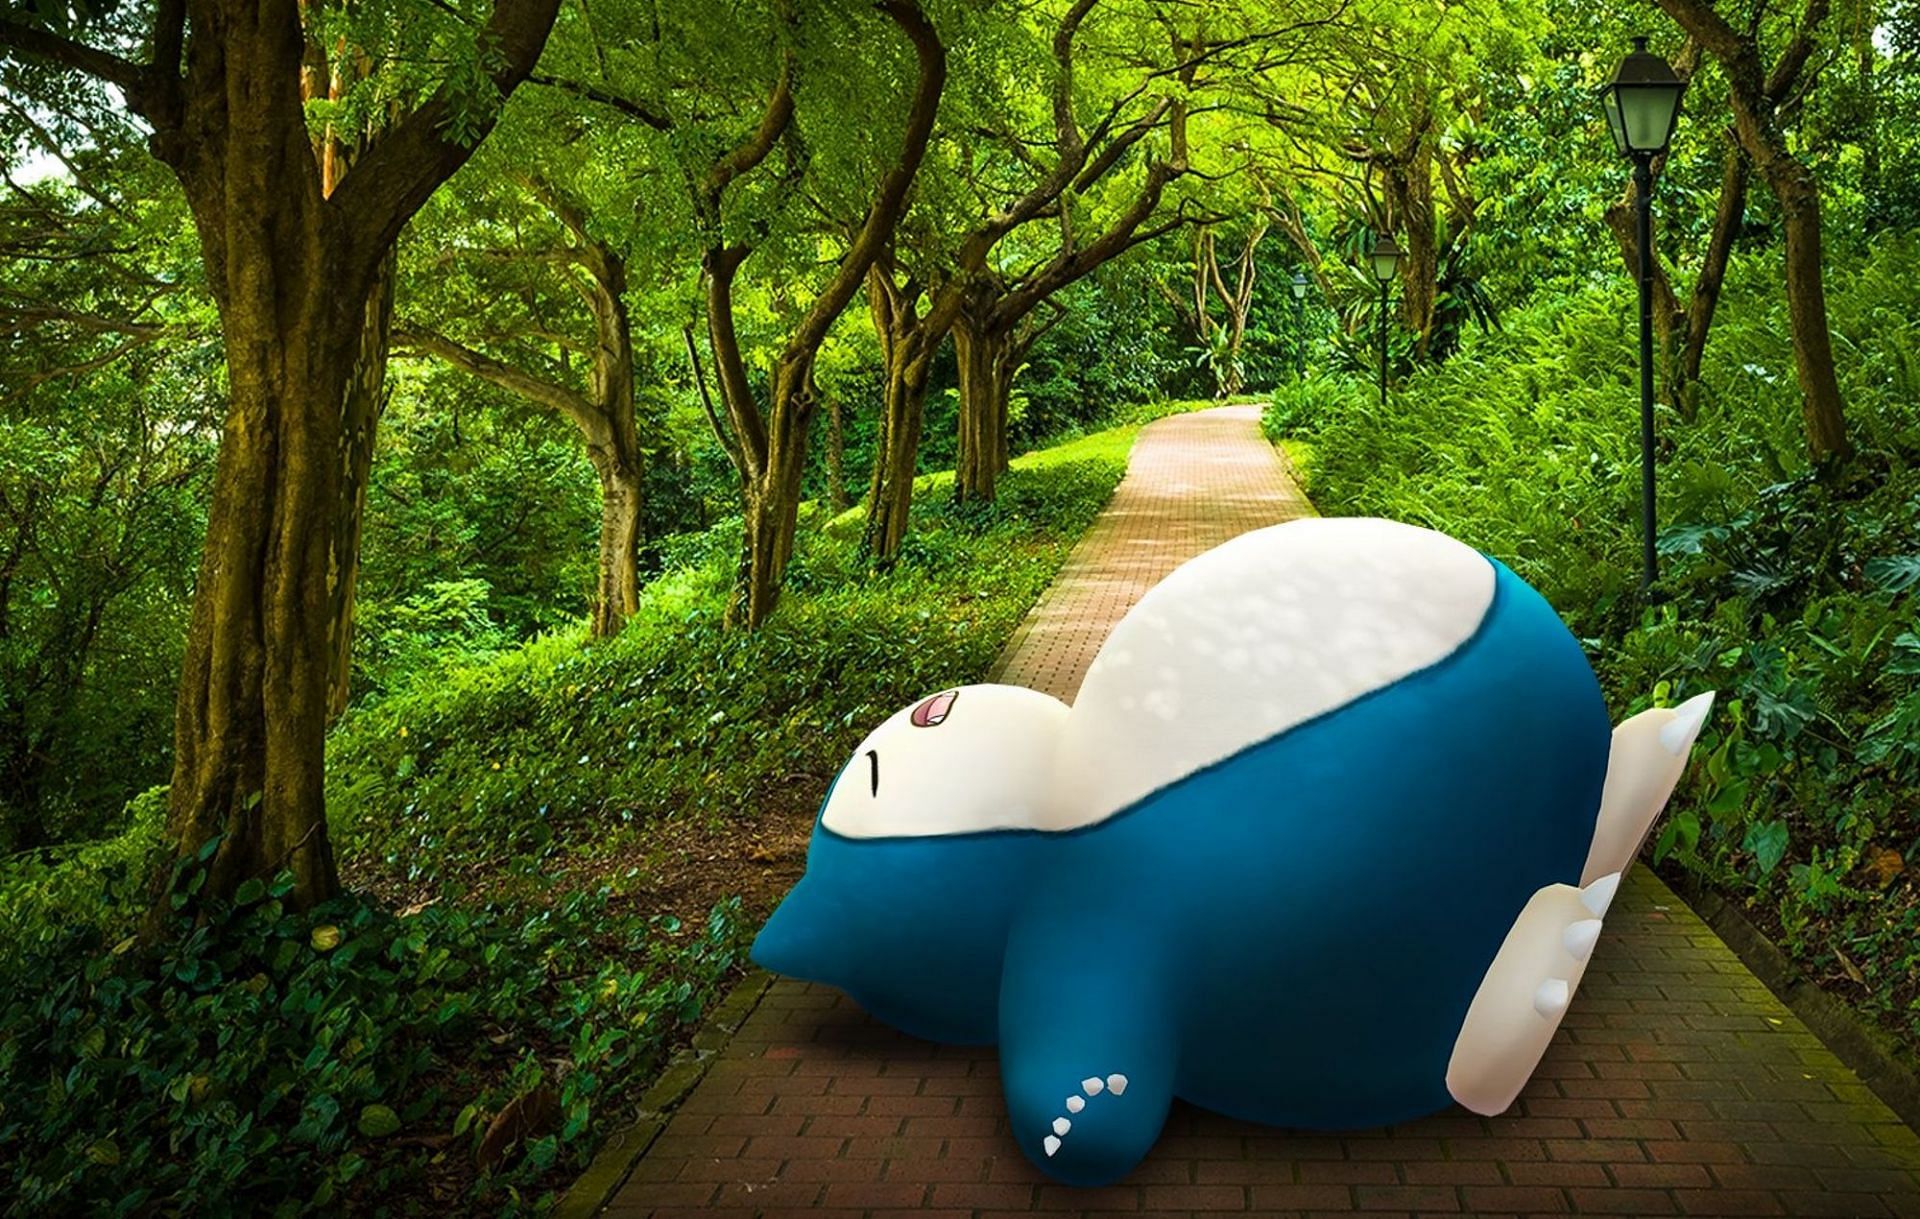 Snorlax can hold out with its immense defensive capabilities (Image via Niantic)